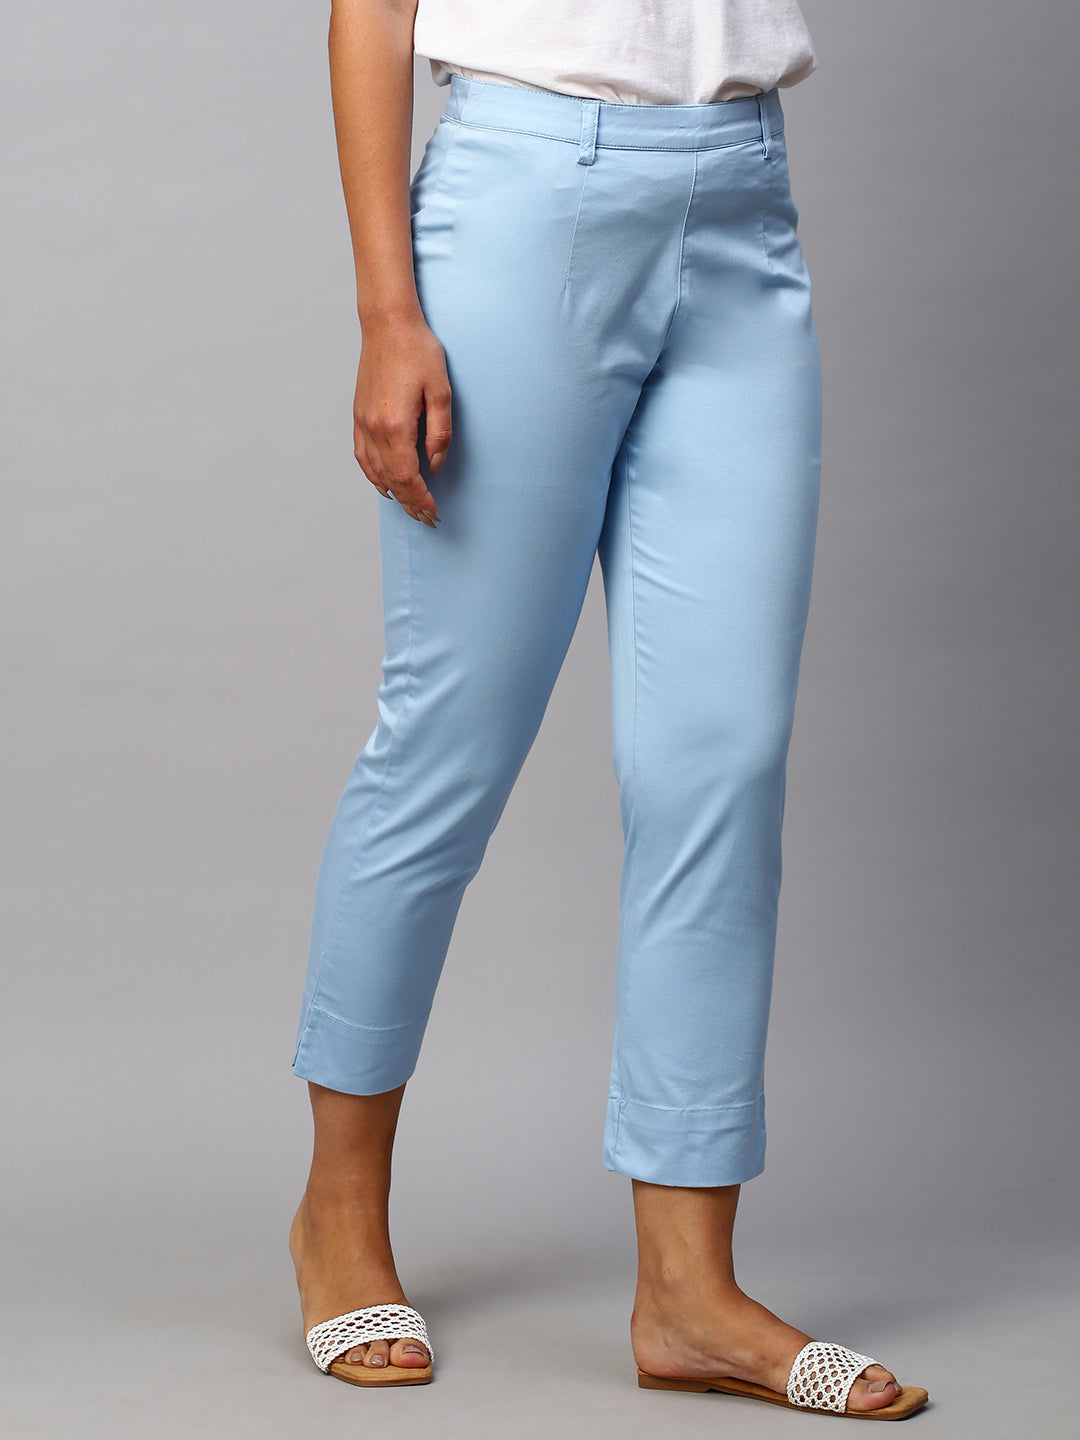 Buy the best Powder blue pants for women in India